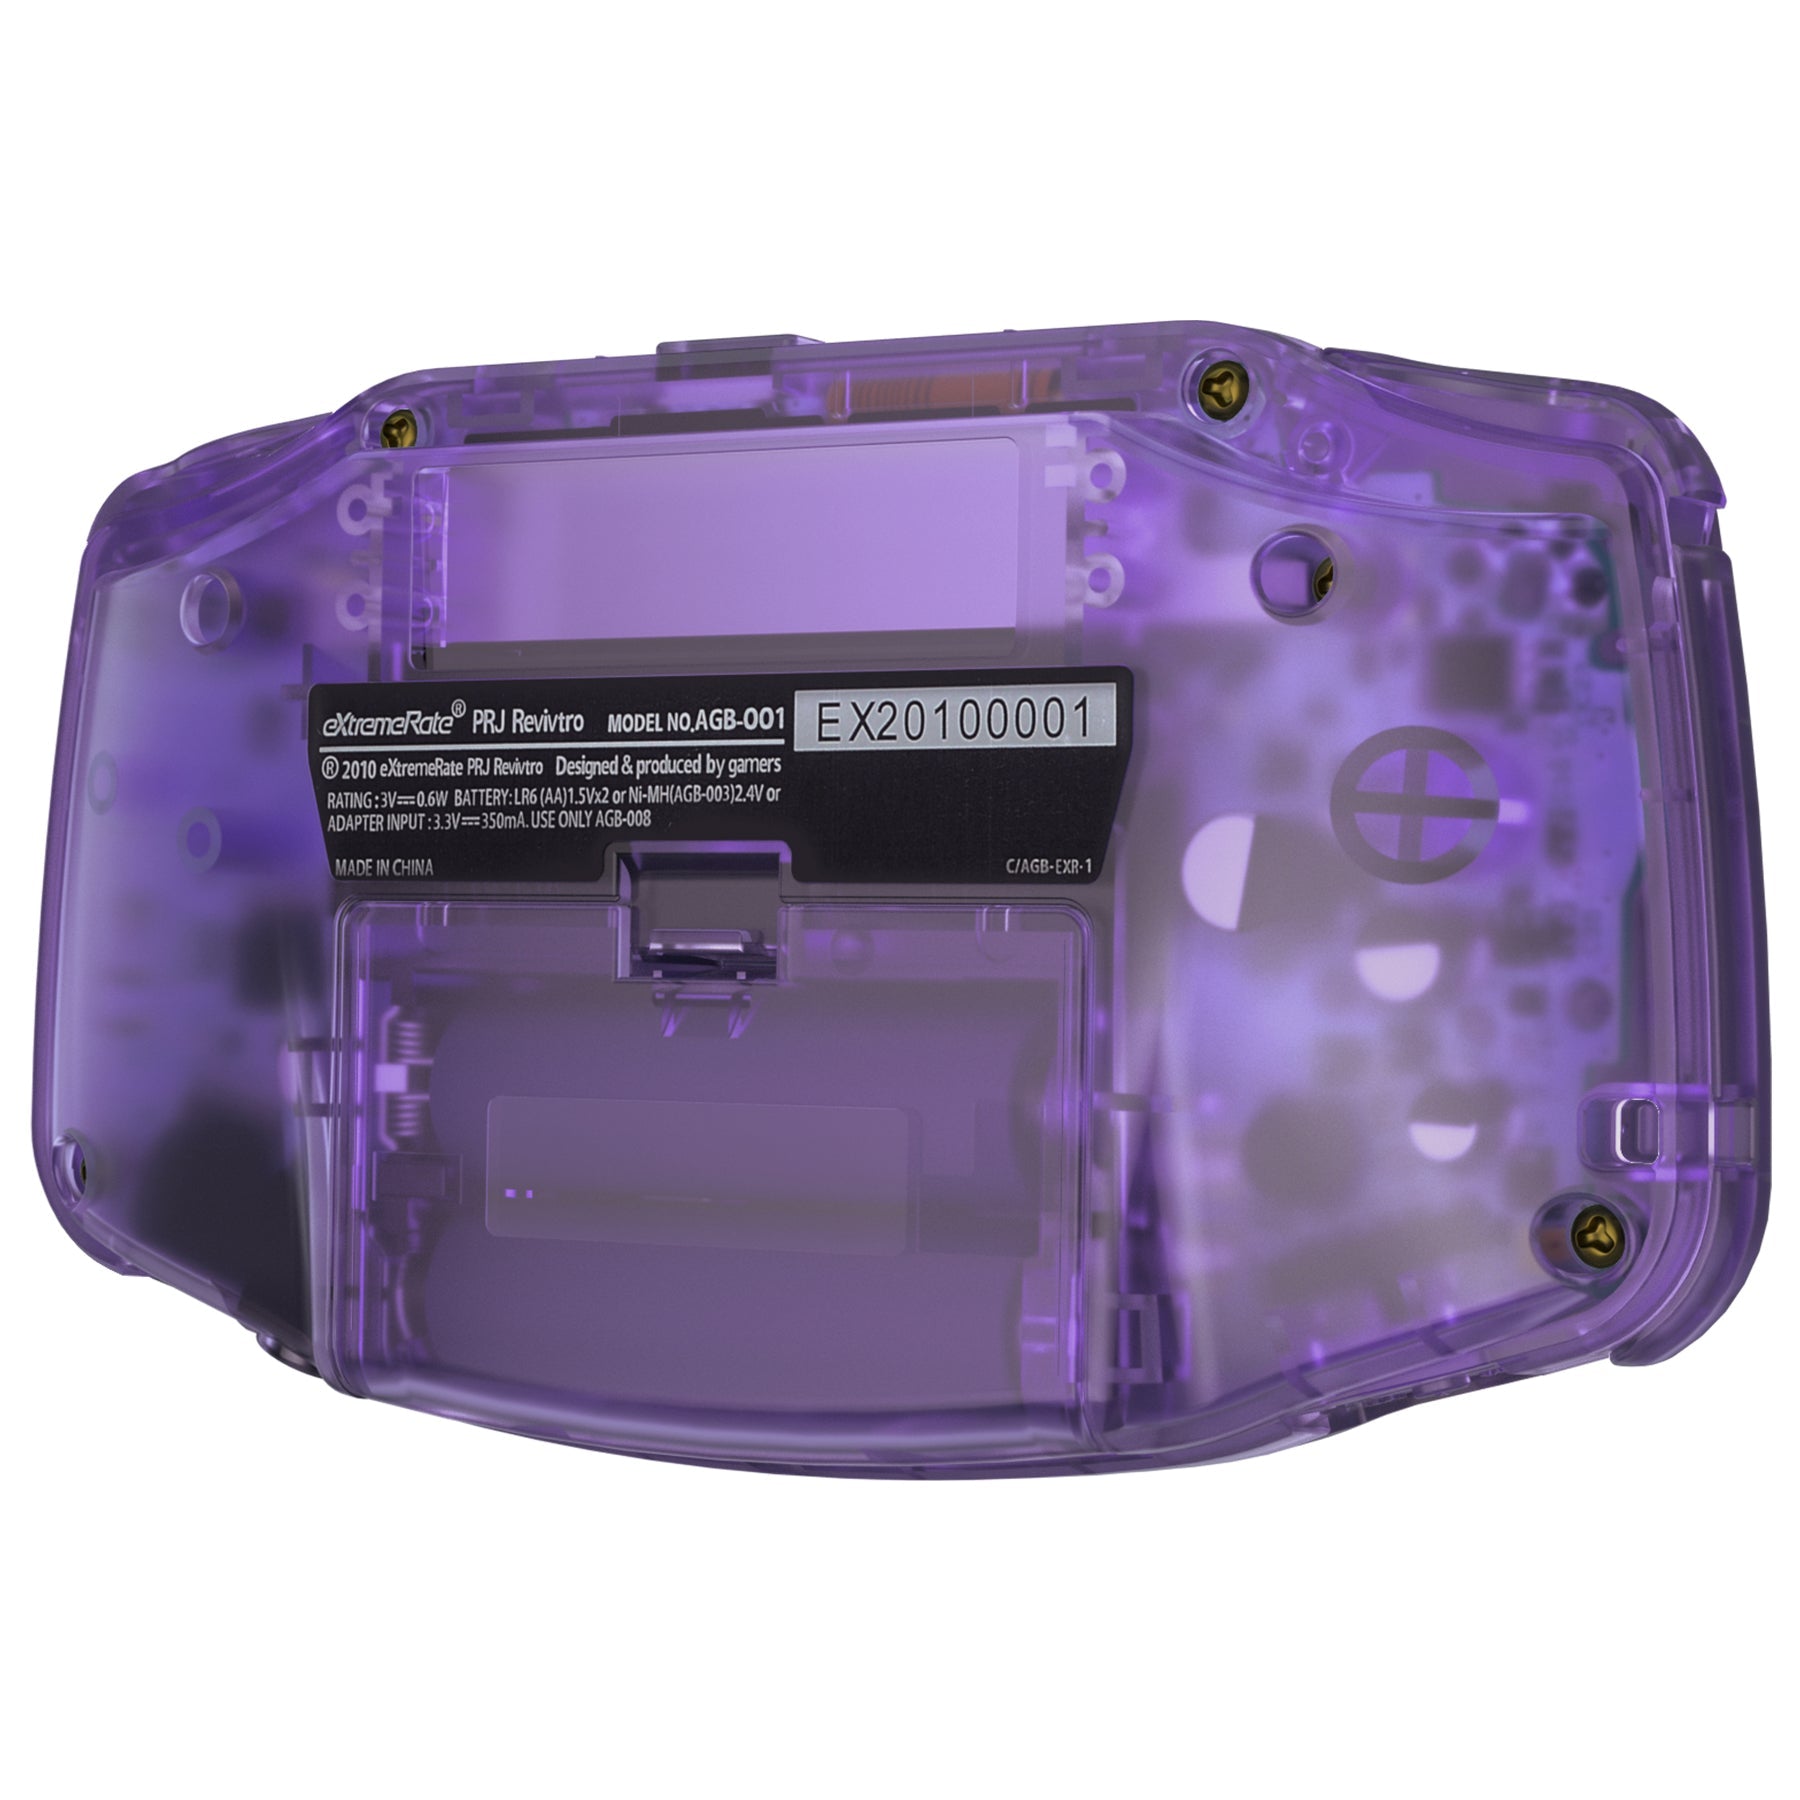 Atomic Purple Gameboy Color with Q5 IPS XL Display Upgrade